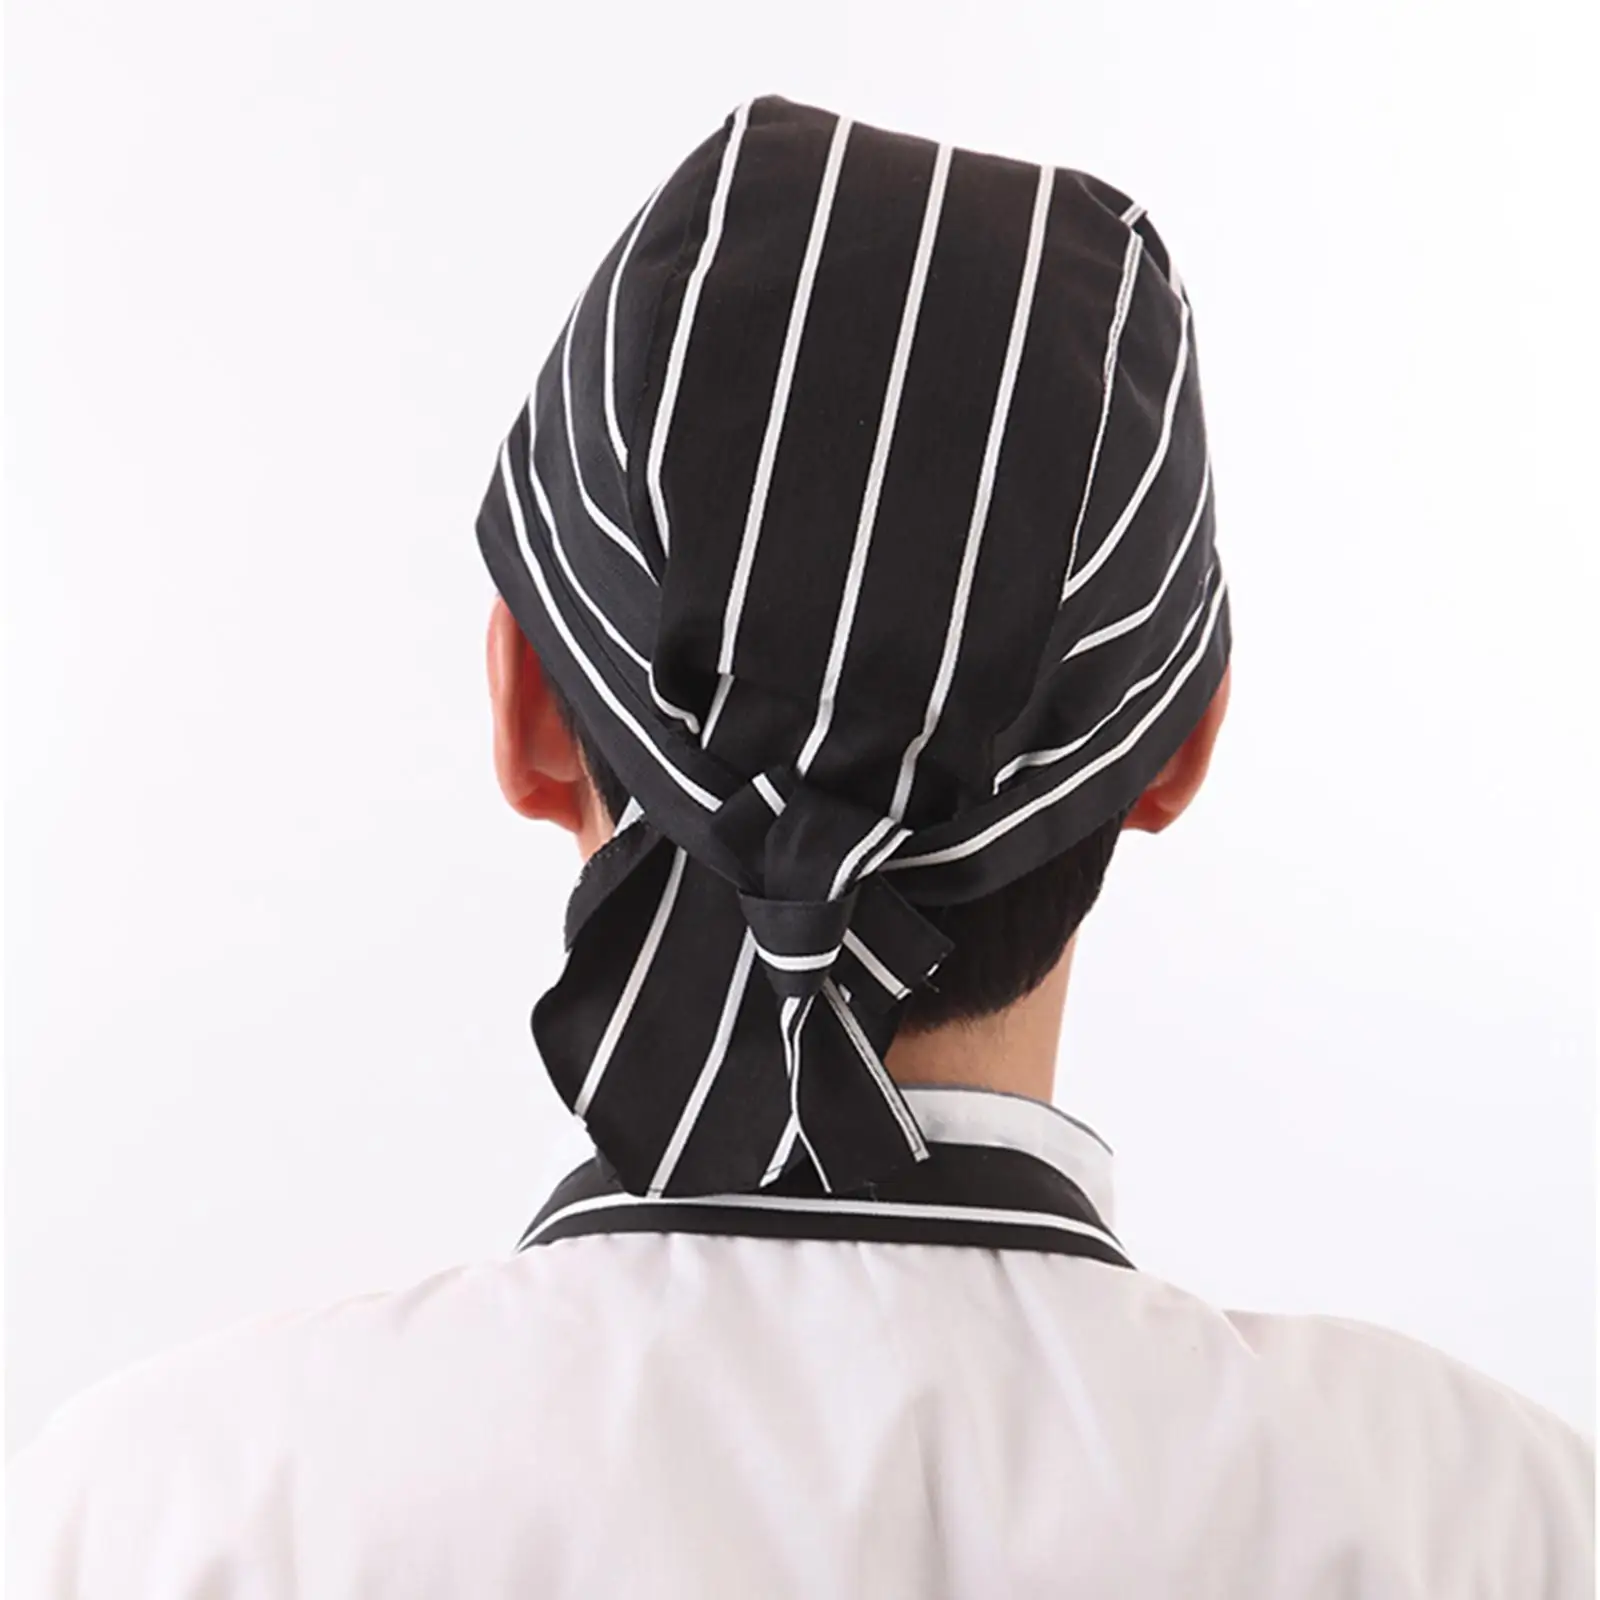 3Pcs Chef Hat Work Wear Hat Hair Cover Chef Tie Back Cap Headwear Kitchen Cooking Cap for Hotel Catering Bar Restaurant Worker